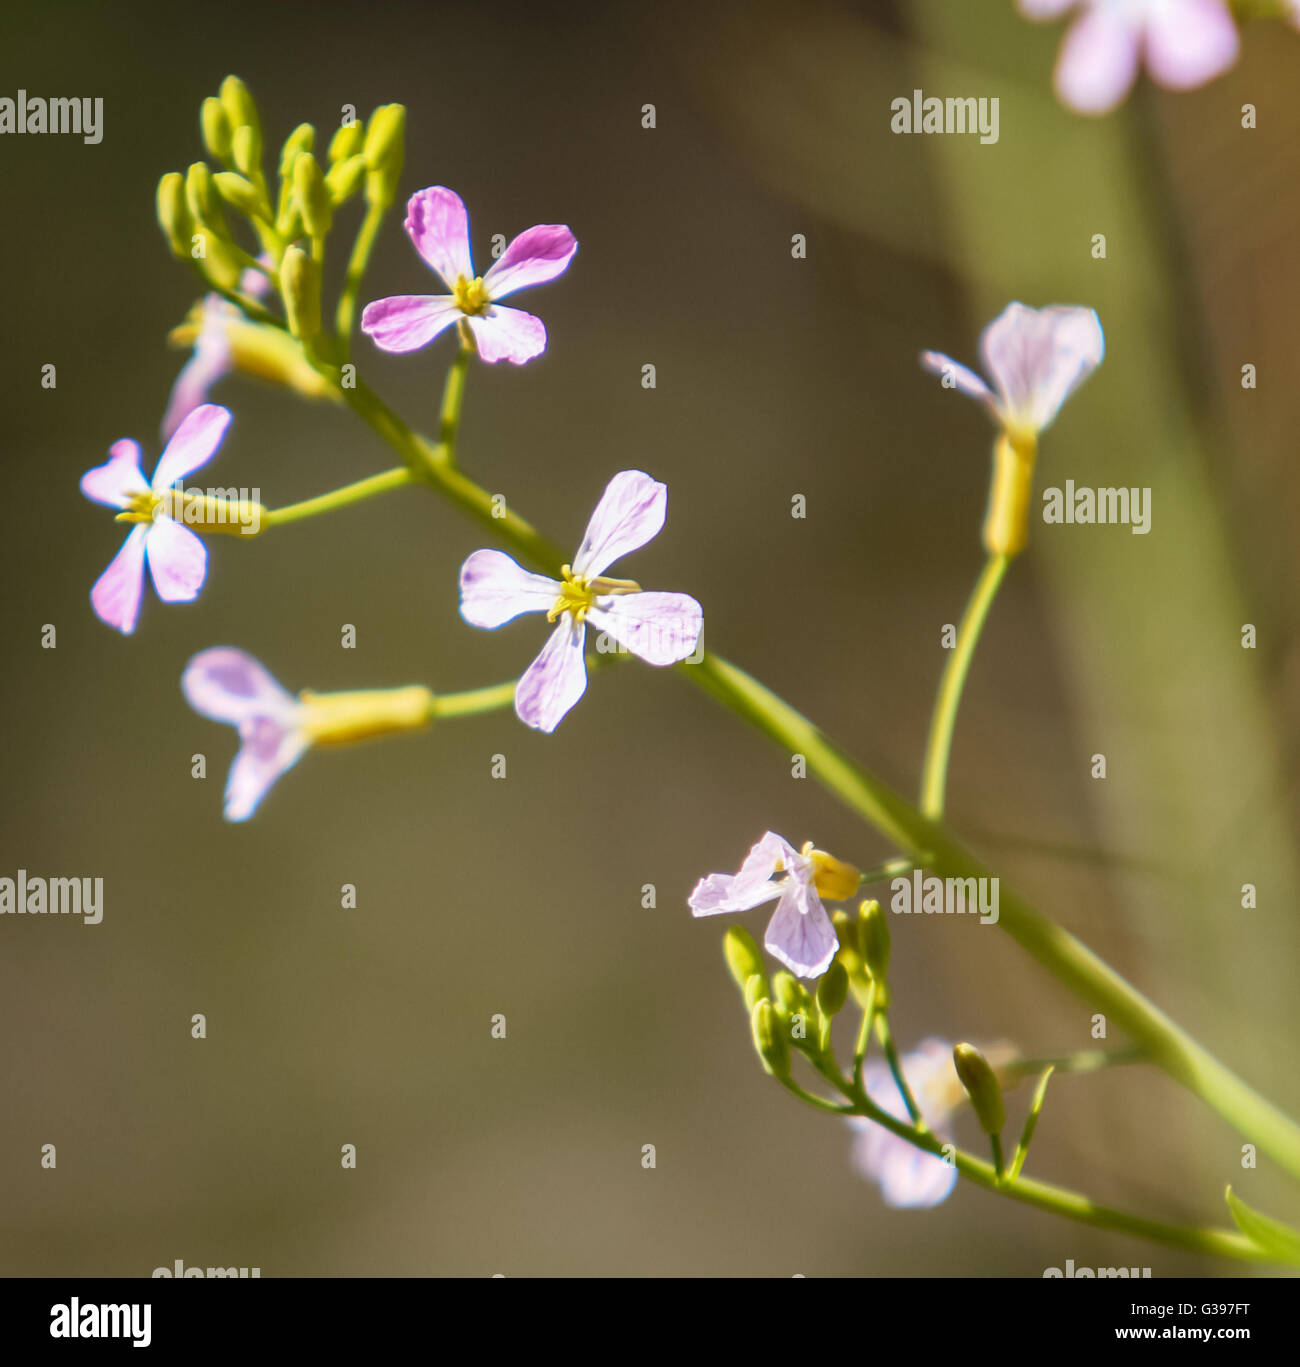 Wild radish, jointed charlock is a flowering plant in the family Brassicaceae Stock Photo